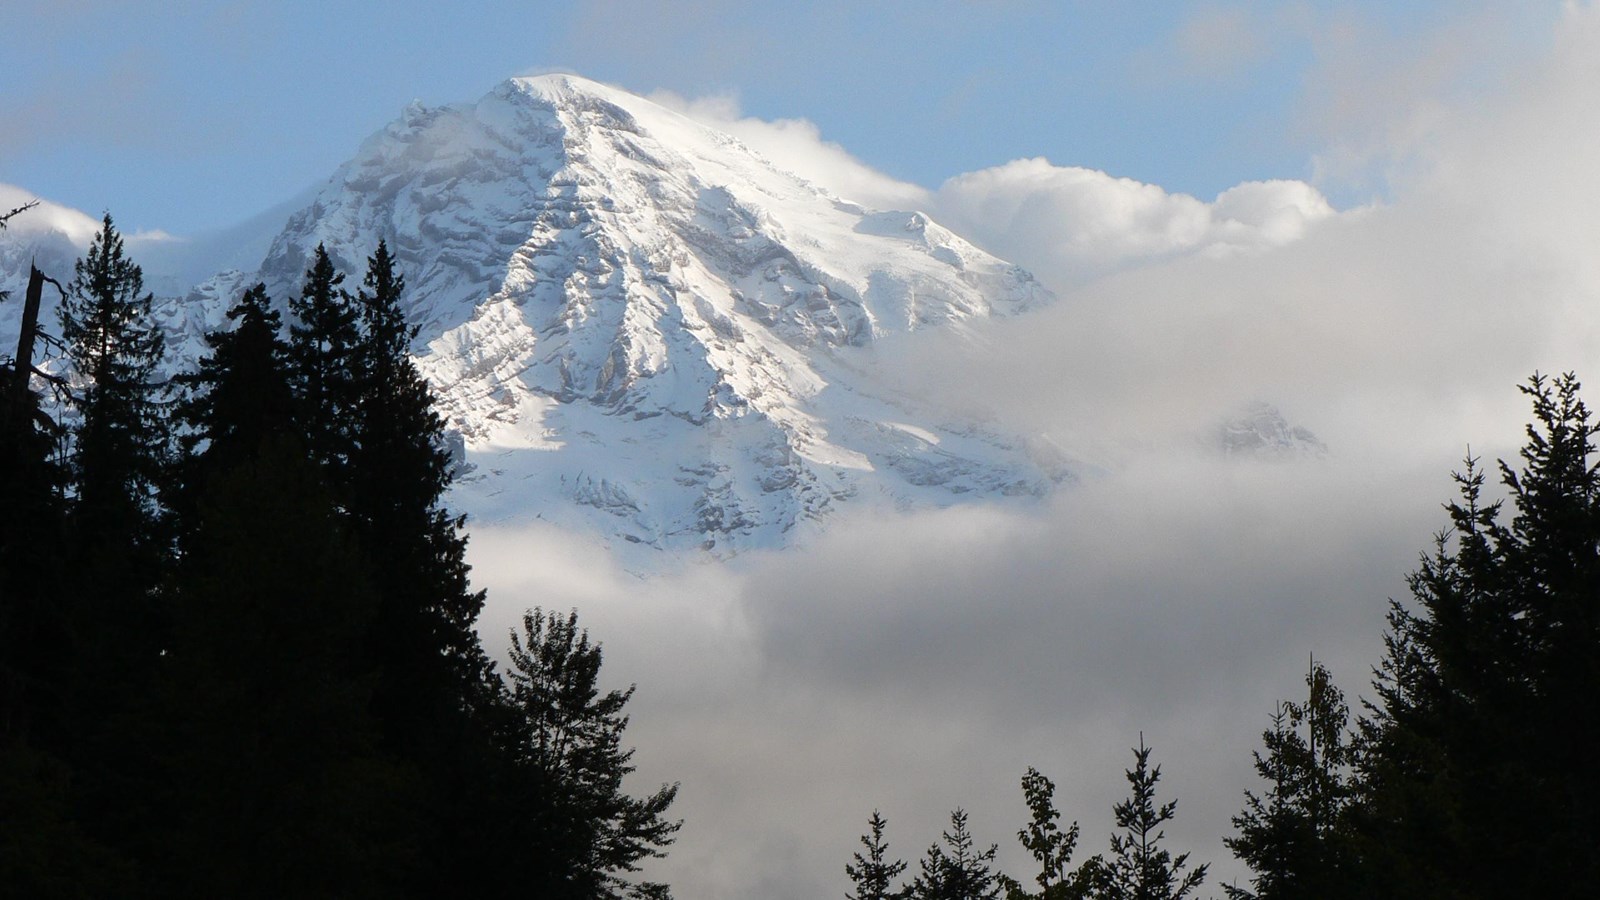 Snow-covered Mount Rainier peaks above the tops of trees.